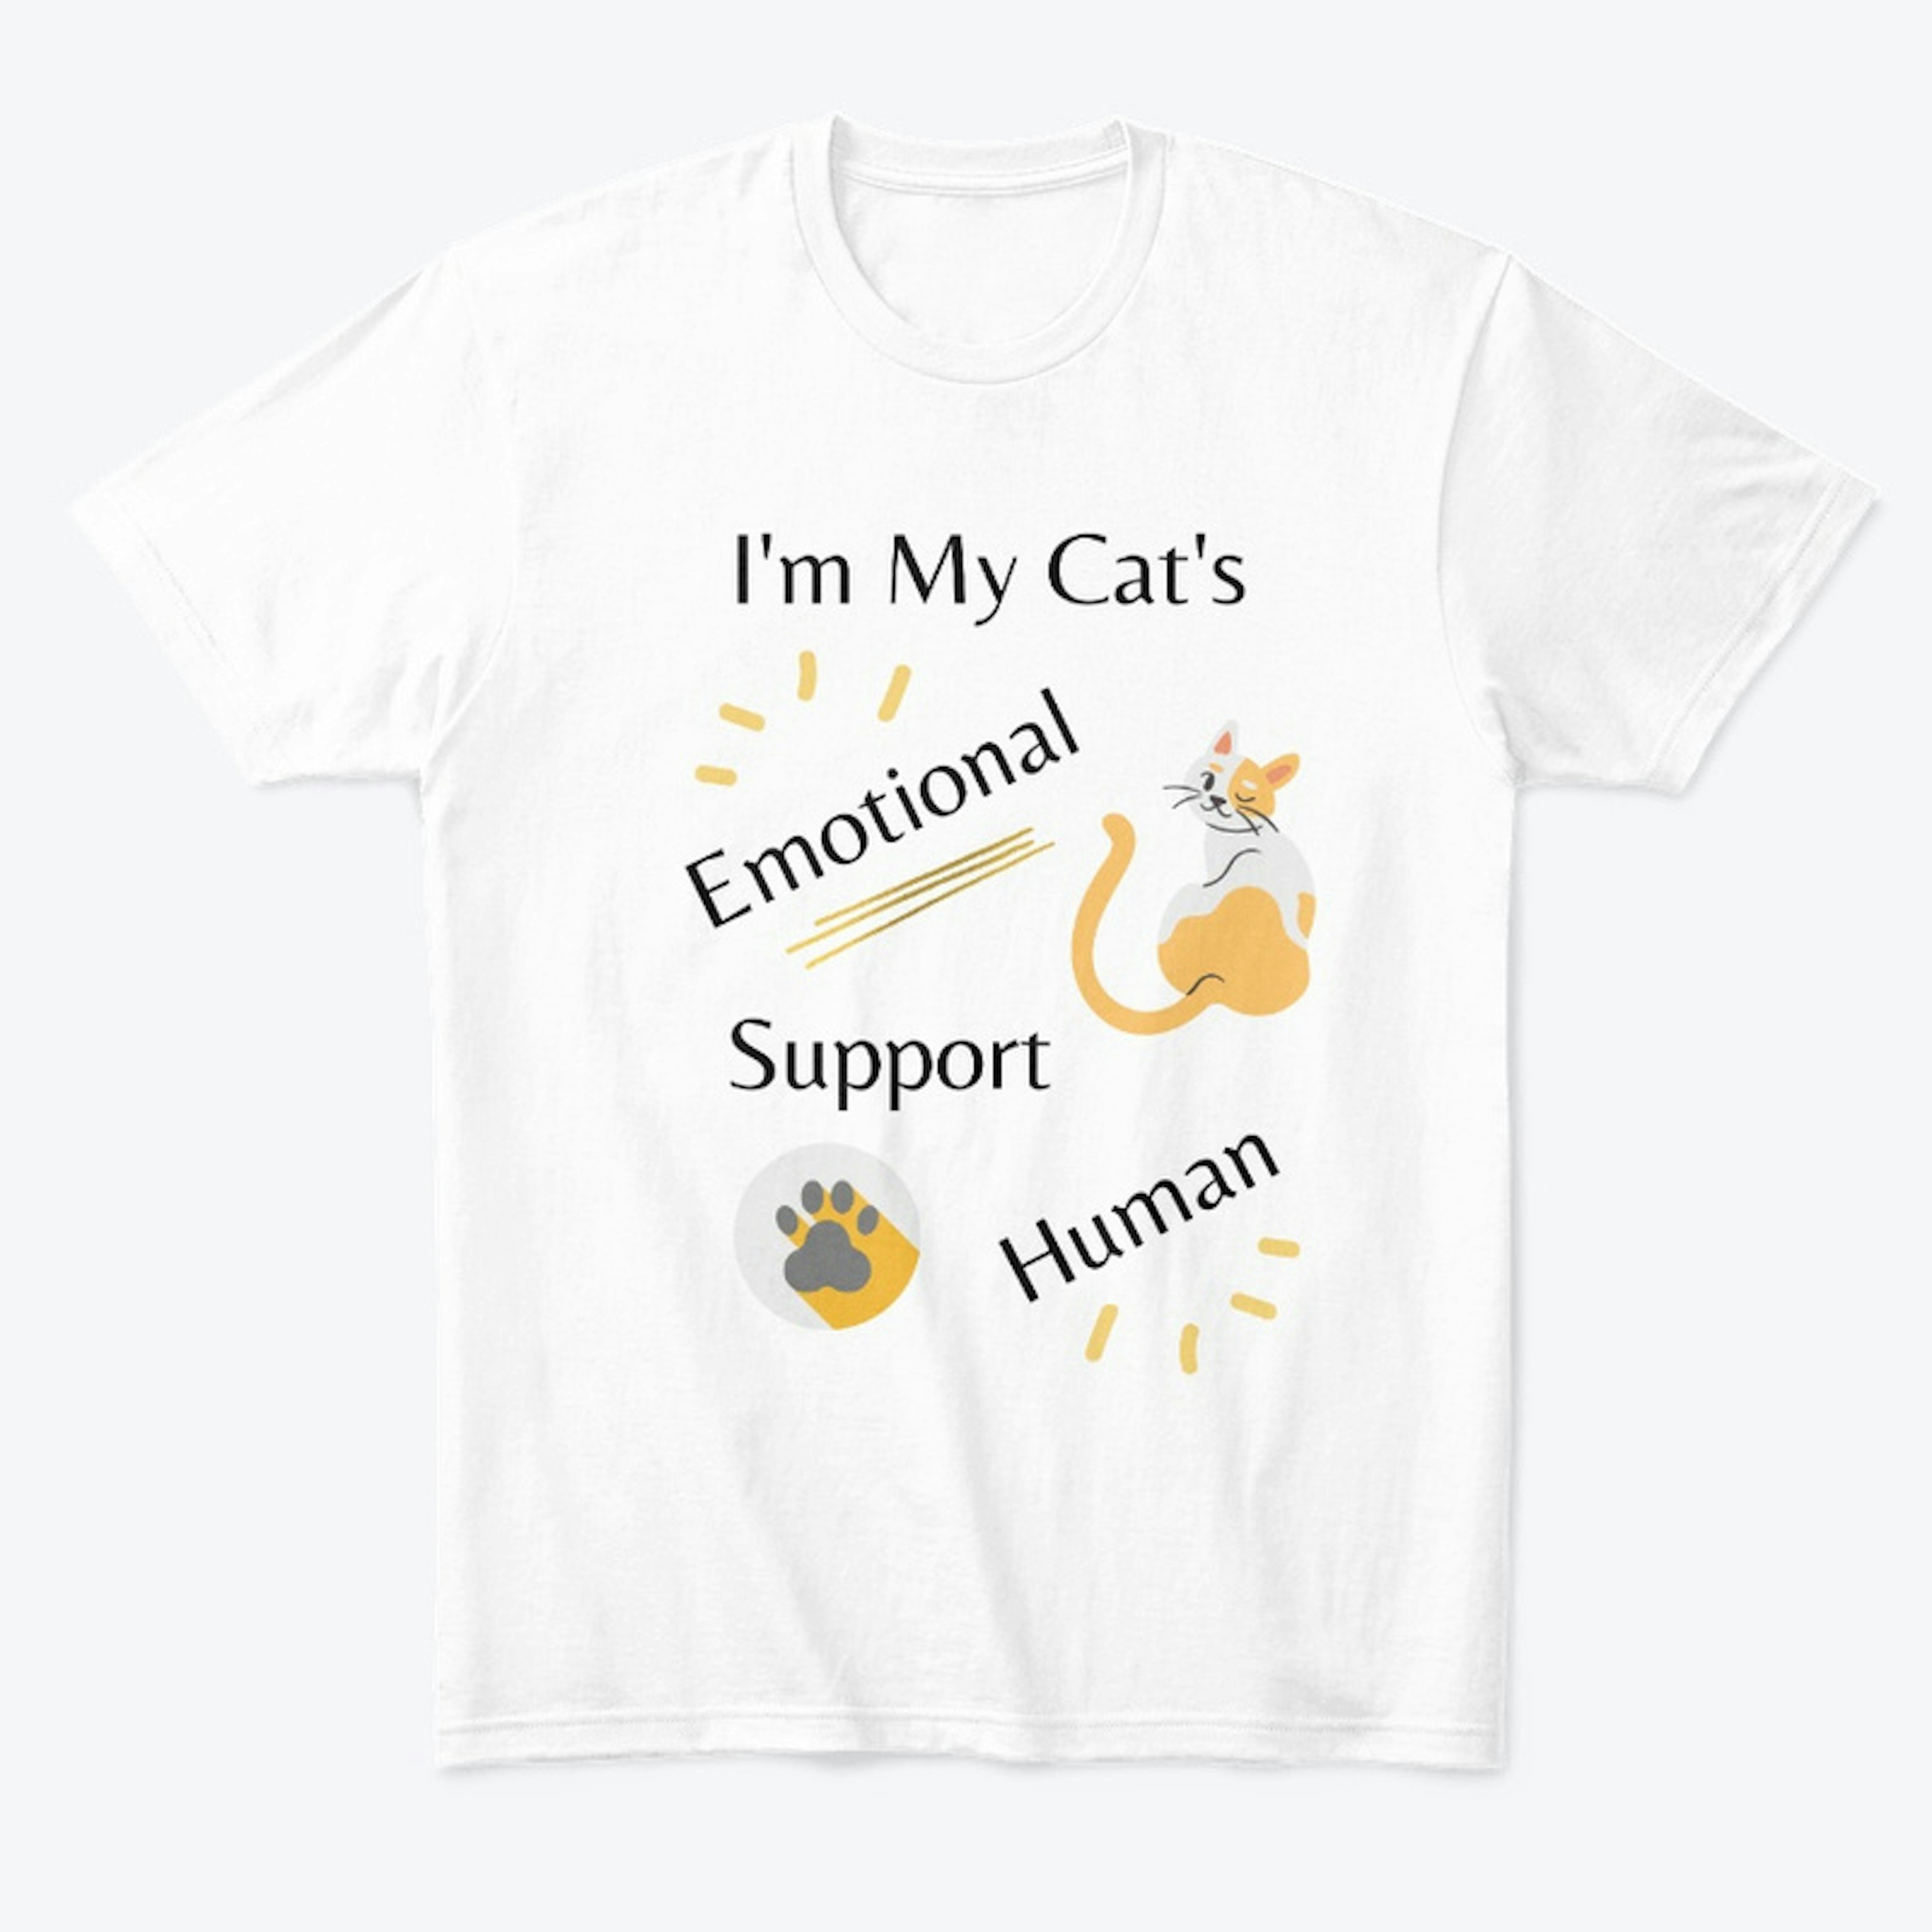 I'm My Cat's Emotional Support Human